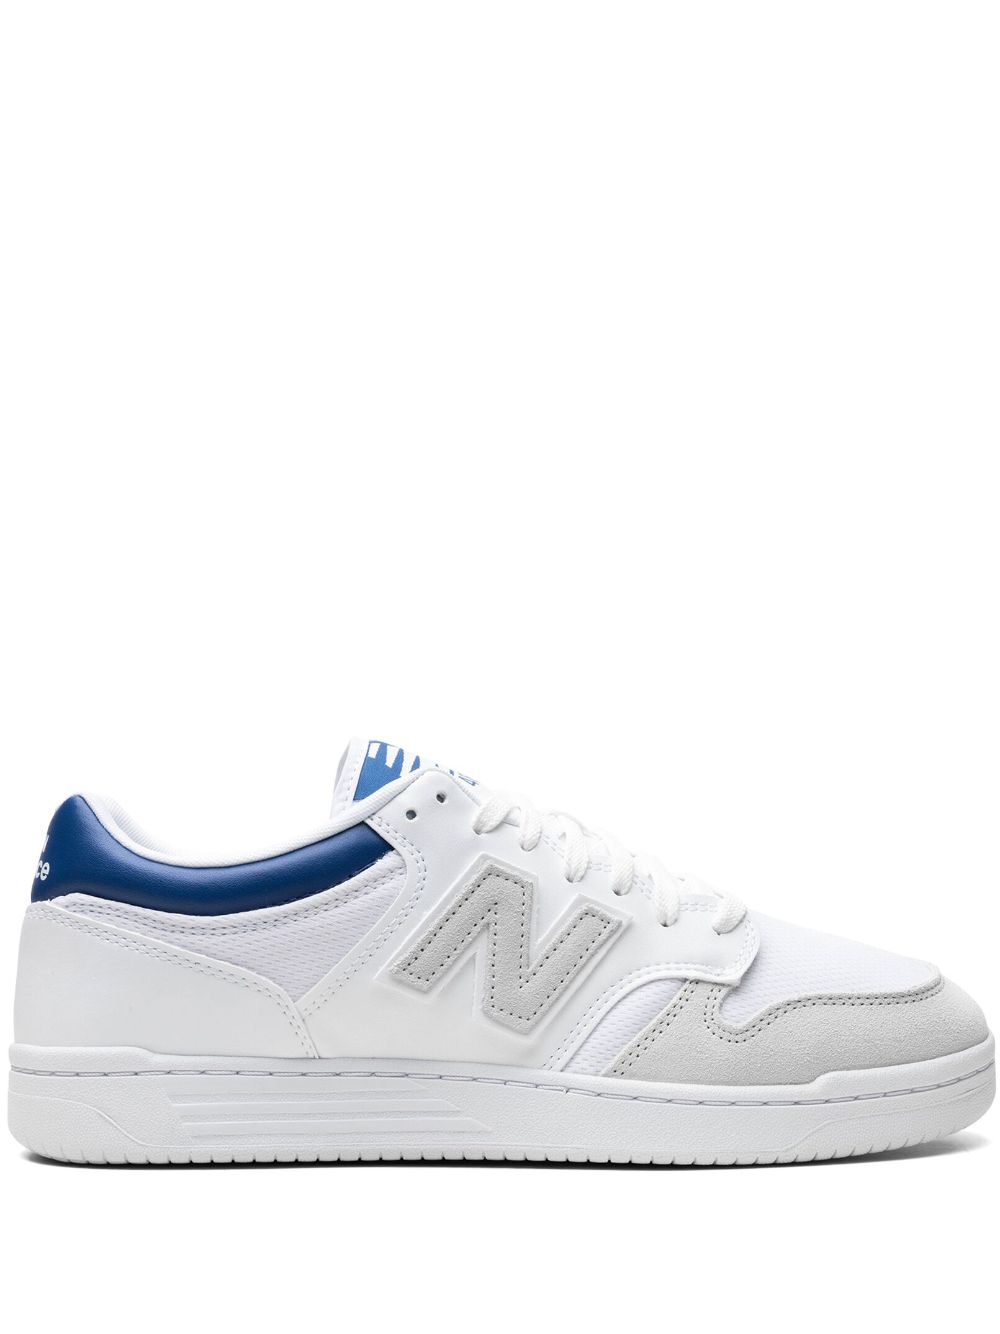 480 "White/Blue" sneakers